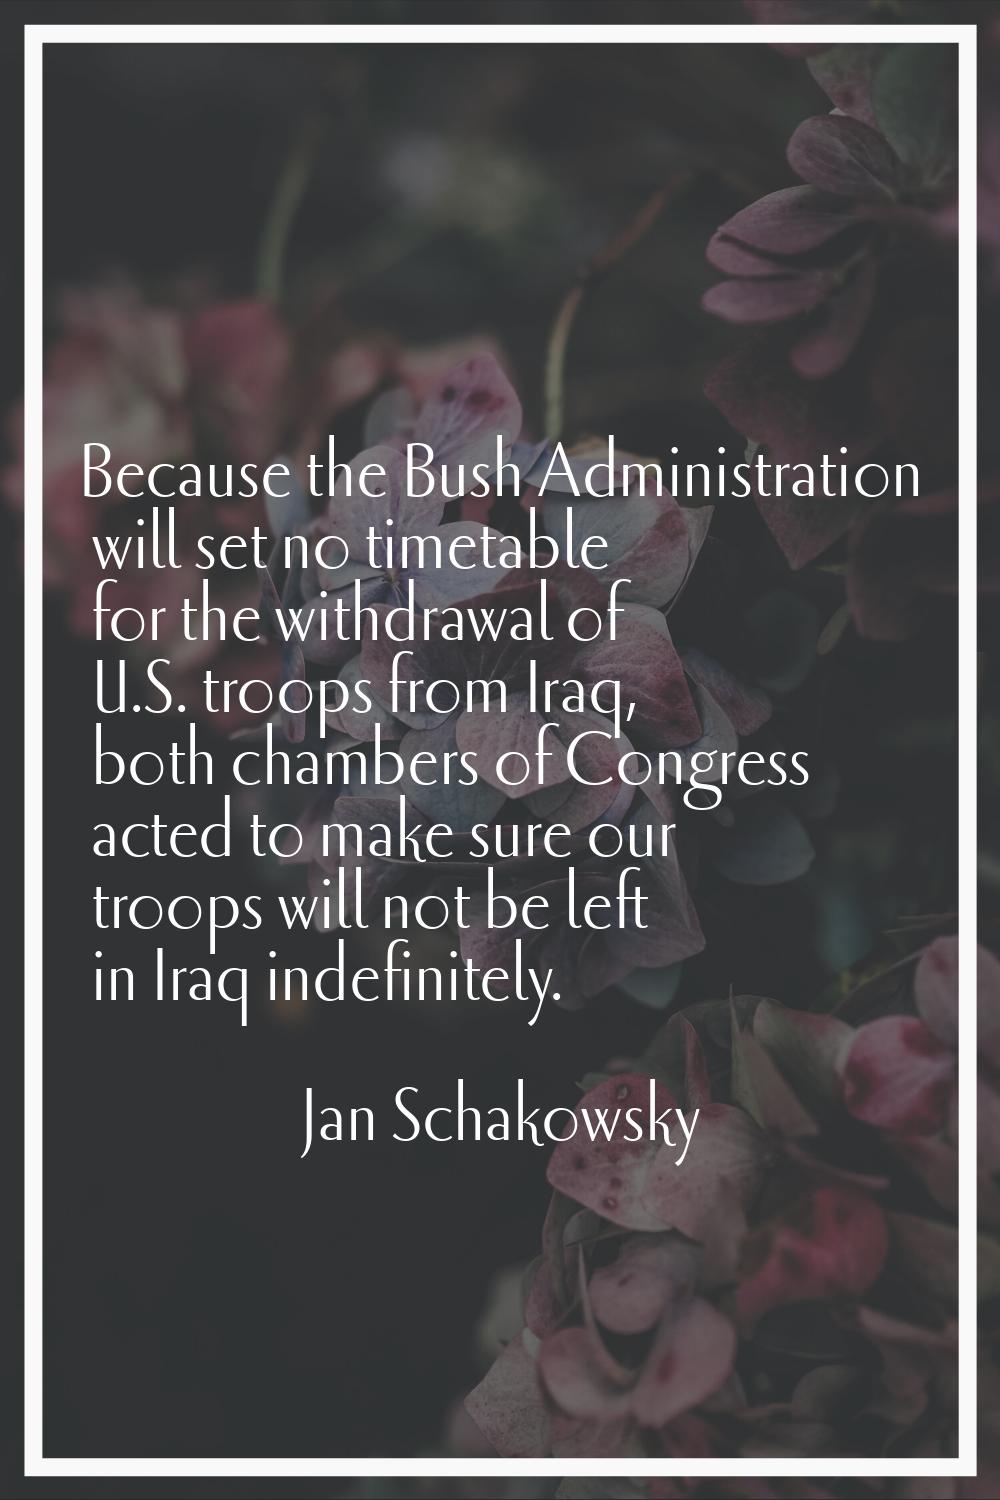 Because the Bush Administration will set no timetable for the withdrawal of U.S. troops from Iraq, 